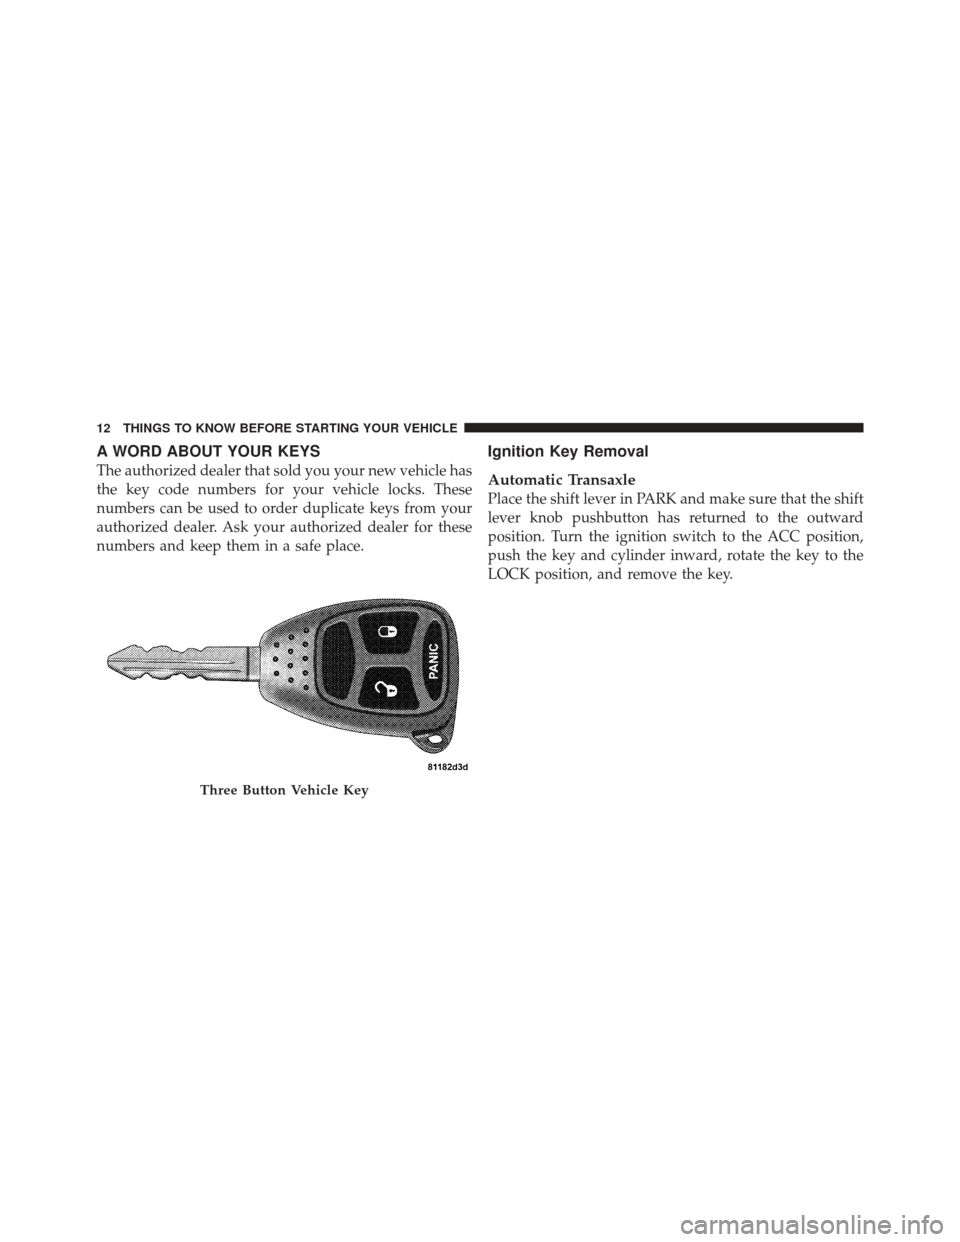 CHRYSLER PT CRUISER 2009 1.G User Guide A WORD ABOUT YOUR KEYS
The authorized dealer that sold you your new vehicle has
the key code numbers for your vehicle locks. These
numbers can be used to order duplicate keys from your
authorized deal